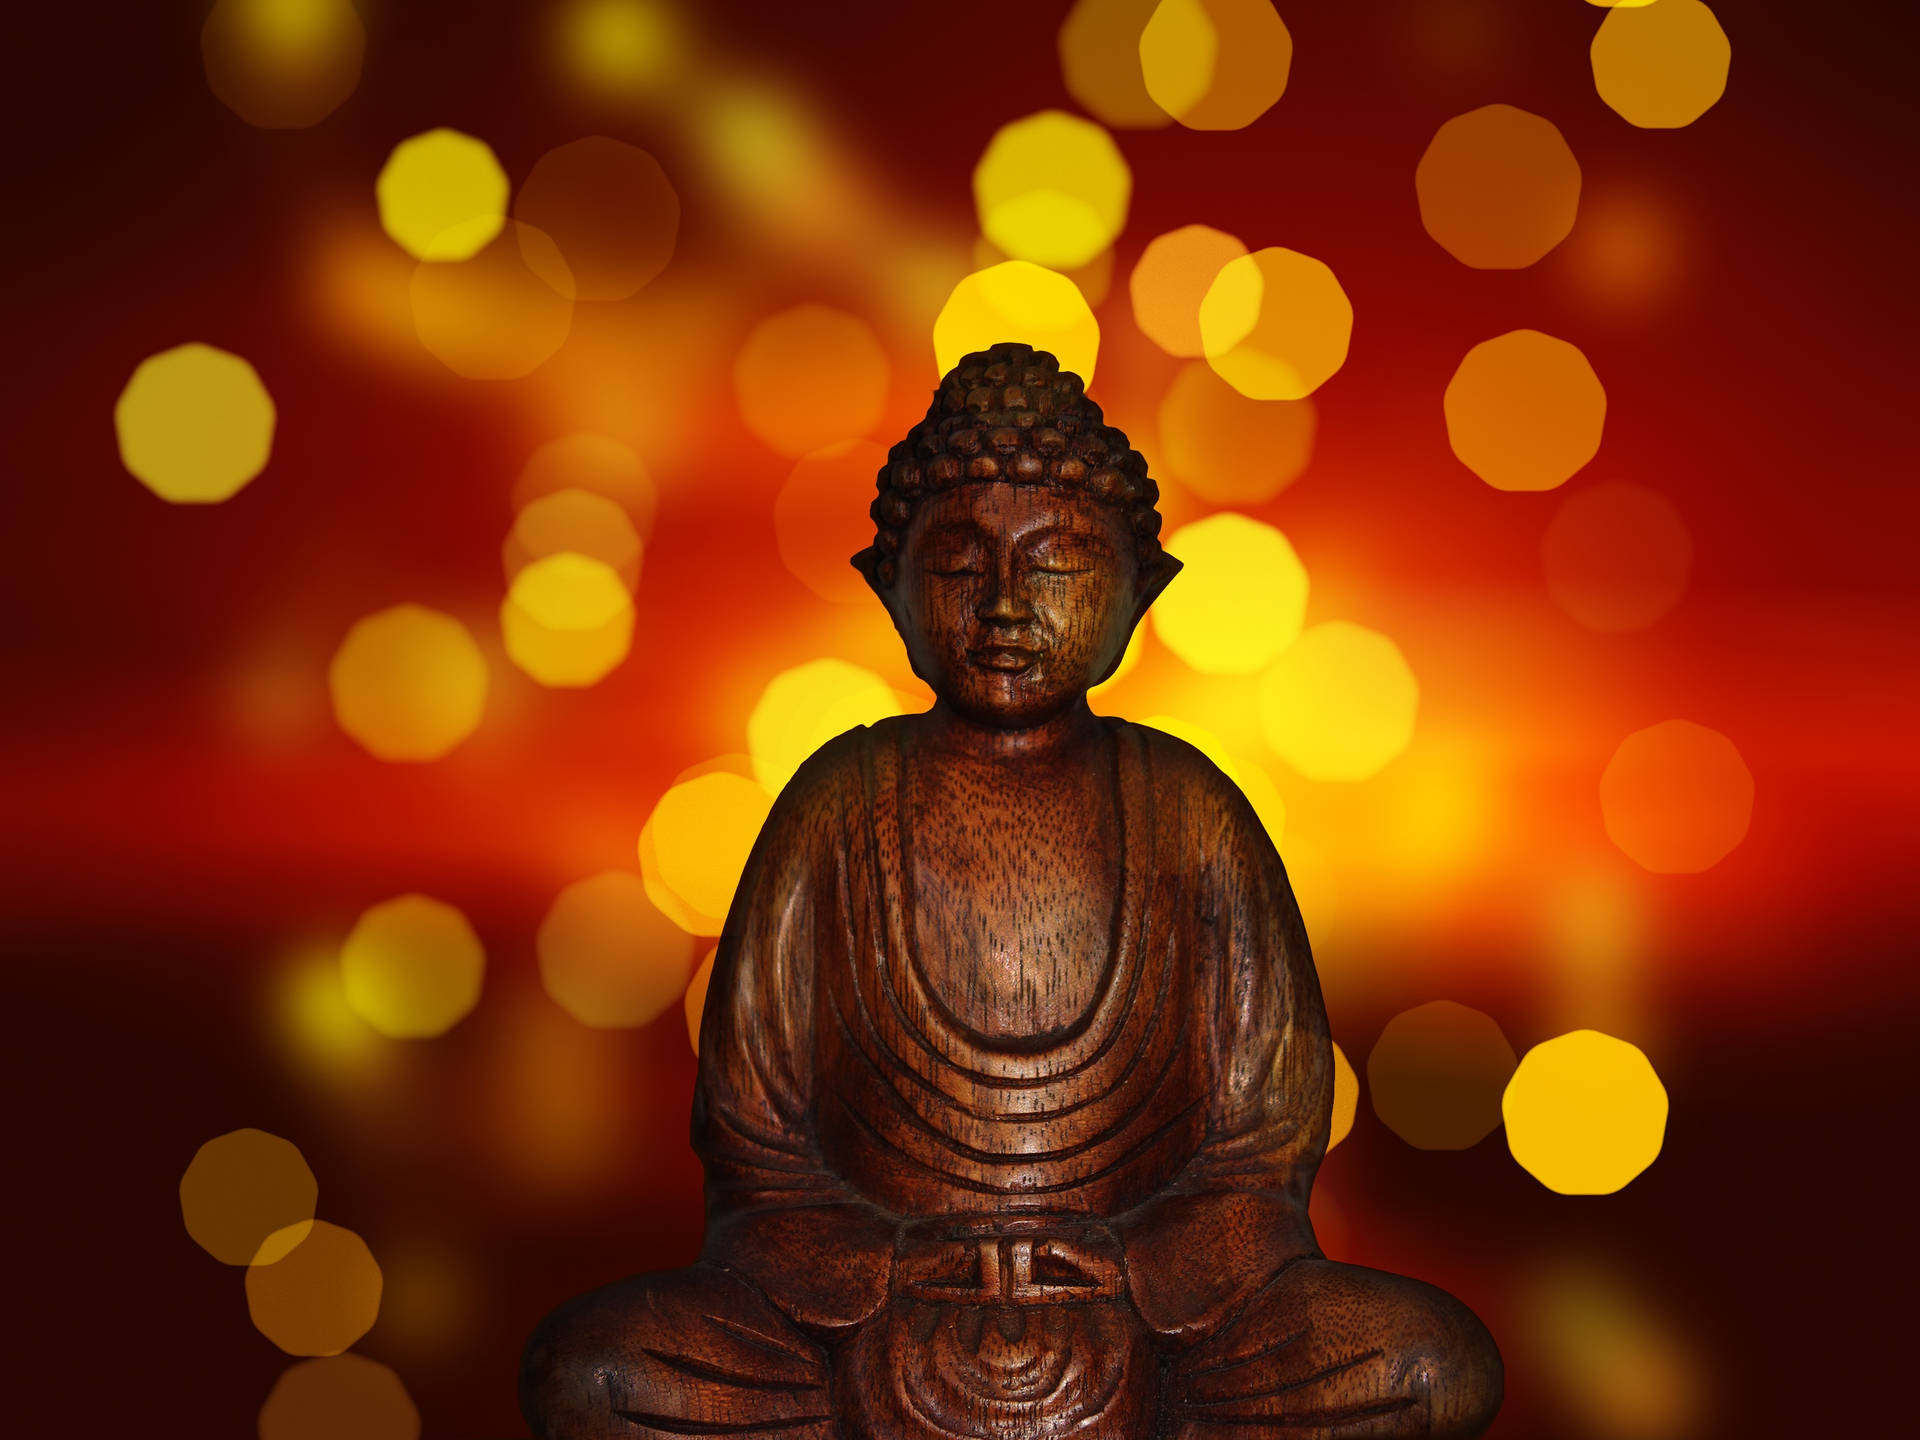 A wooden Buddha Statue surrounded by an ethereal setting. Wallpaper